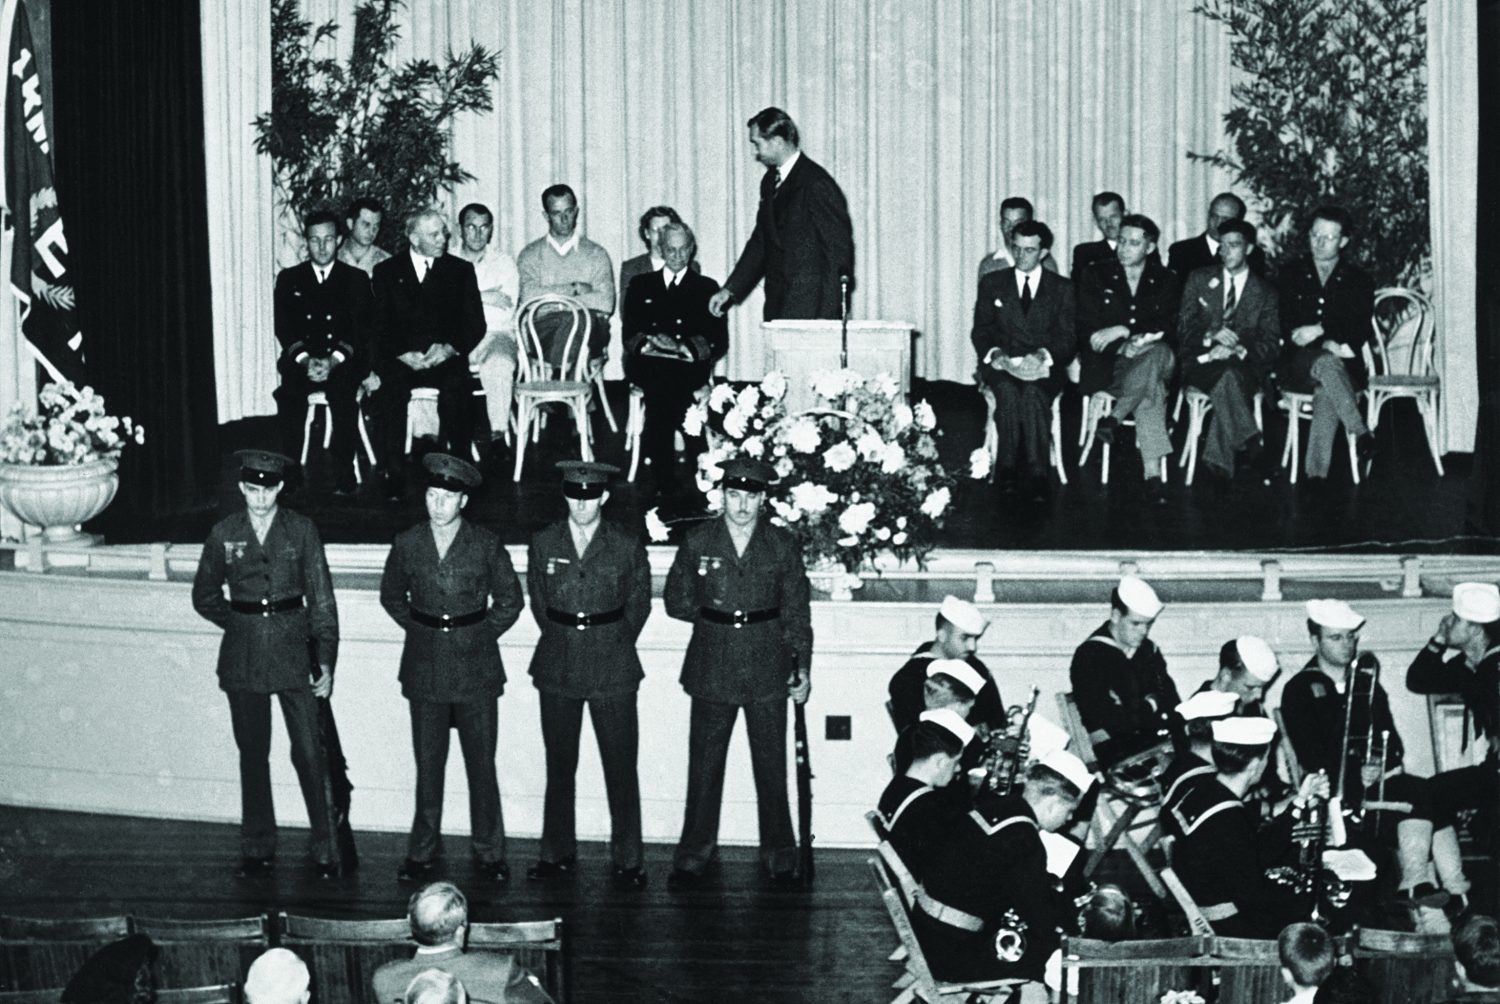 Dave Packard accepting the Army-Navy E Award on November 20, 1943.